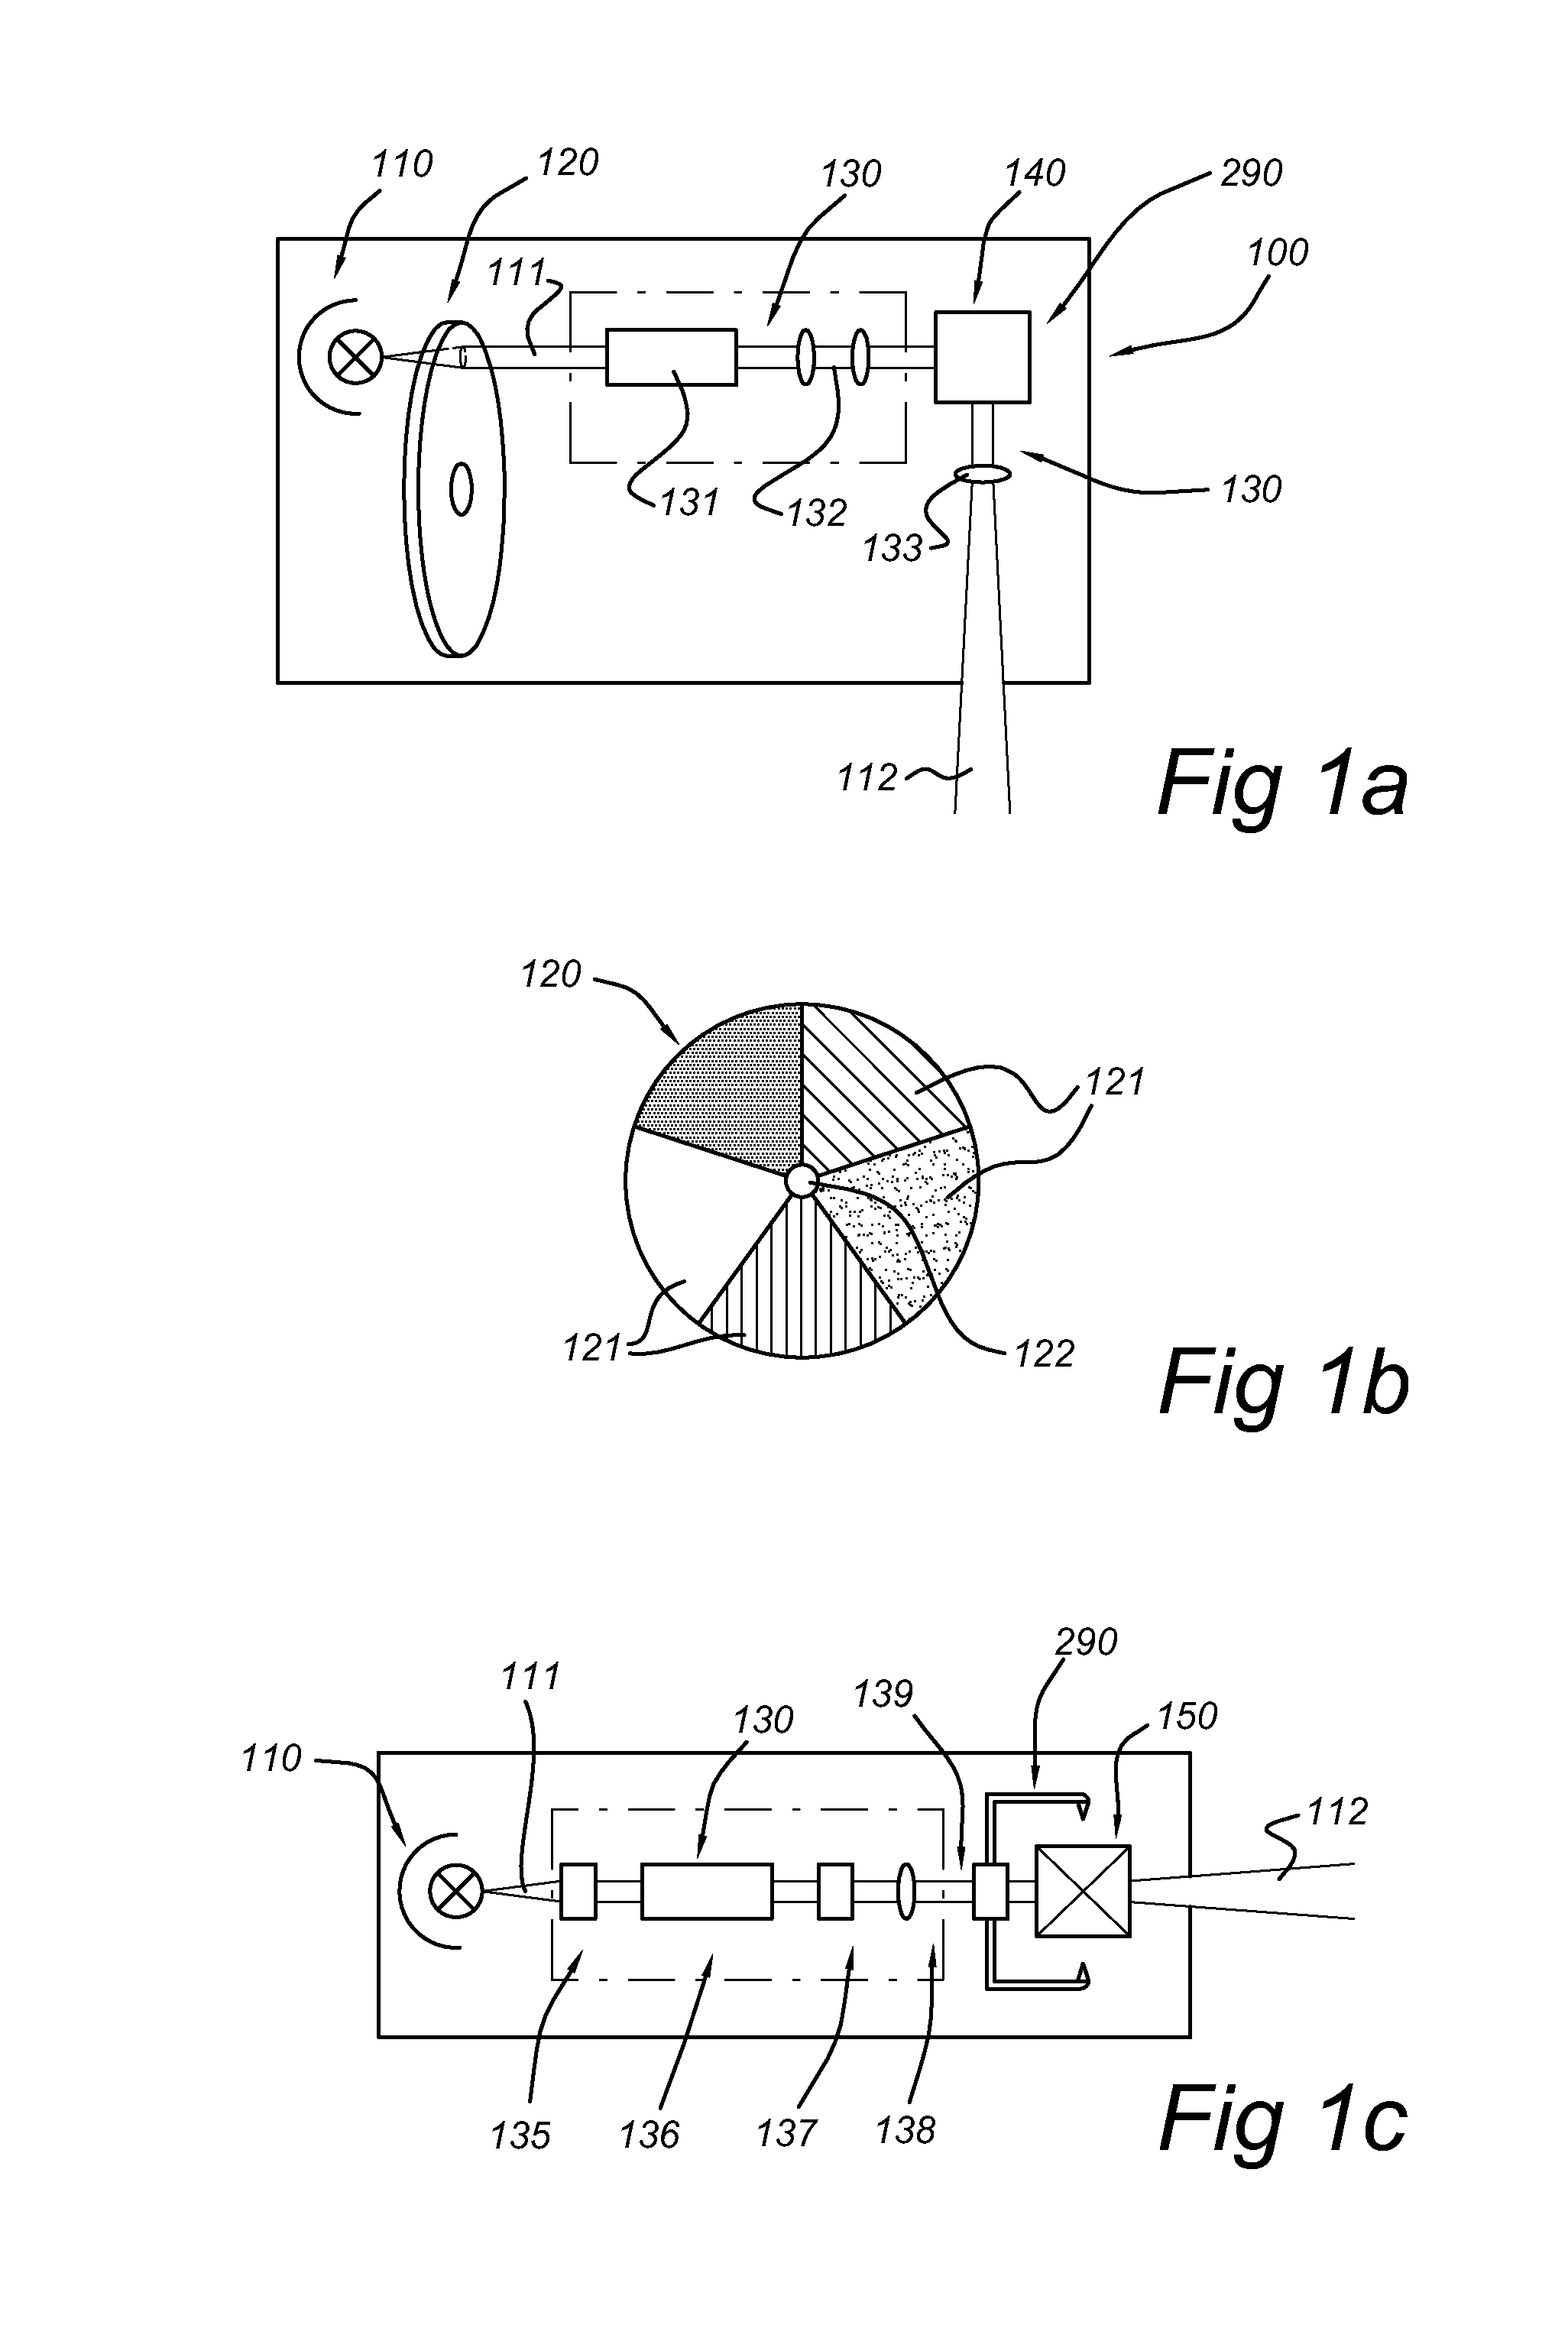 Projection system comprising a solid state light source and a luminsecent material